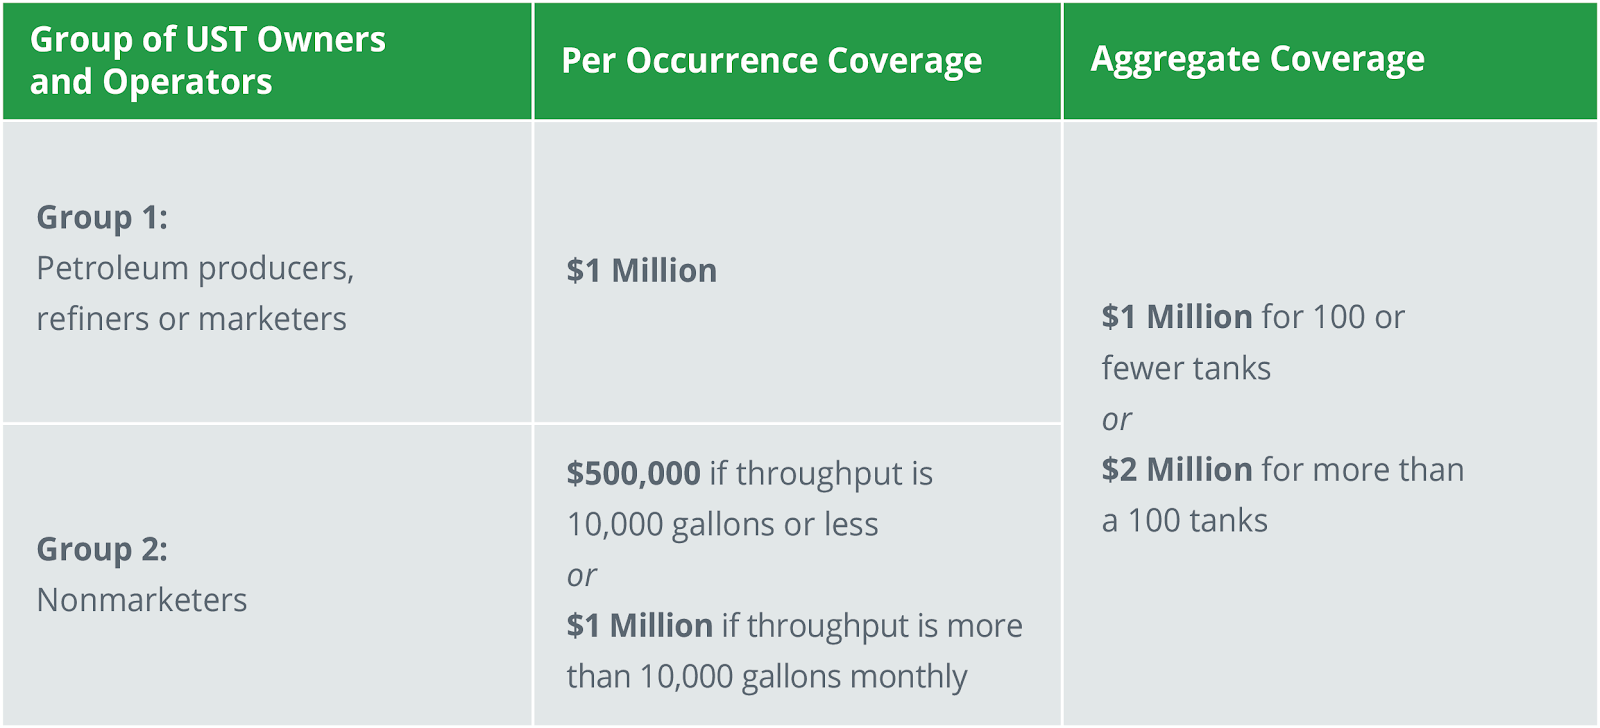 Table showing cost of coverage for various groups of UST Owners and Operators